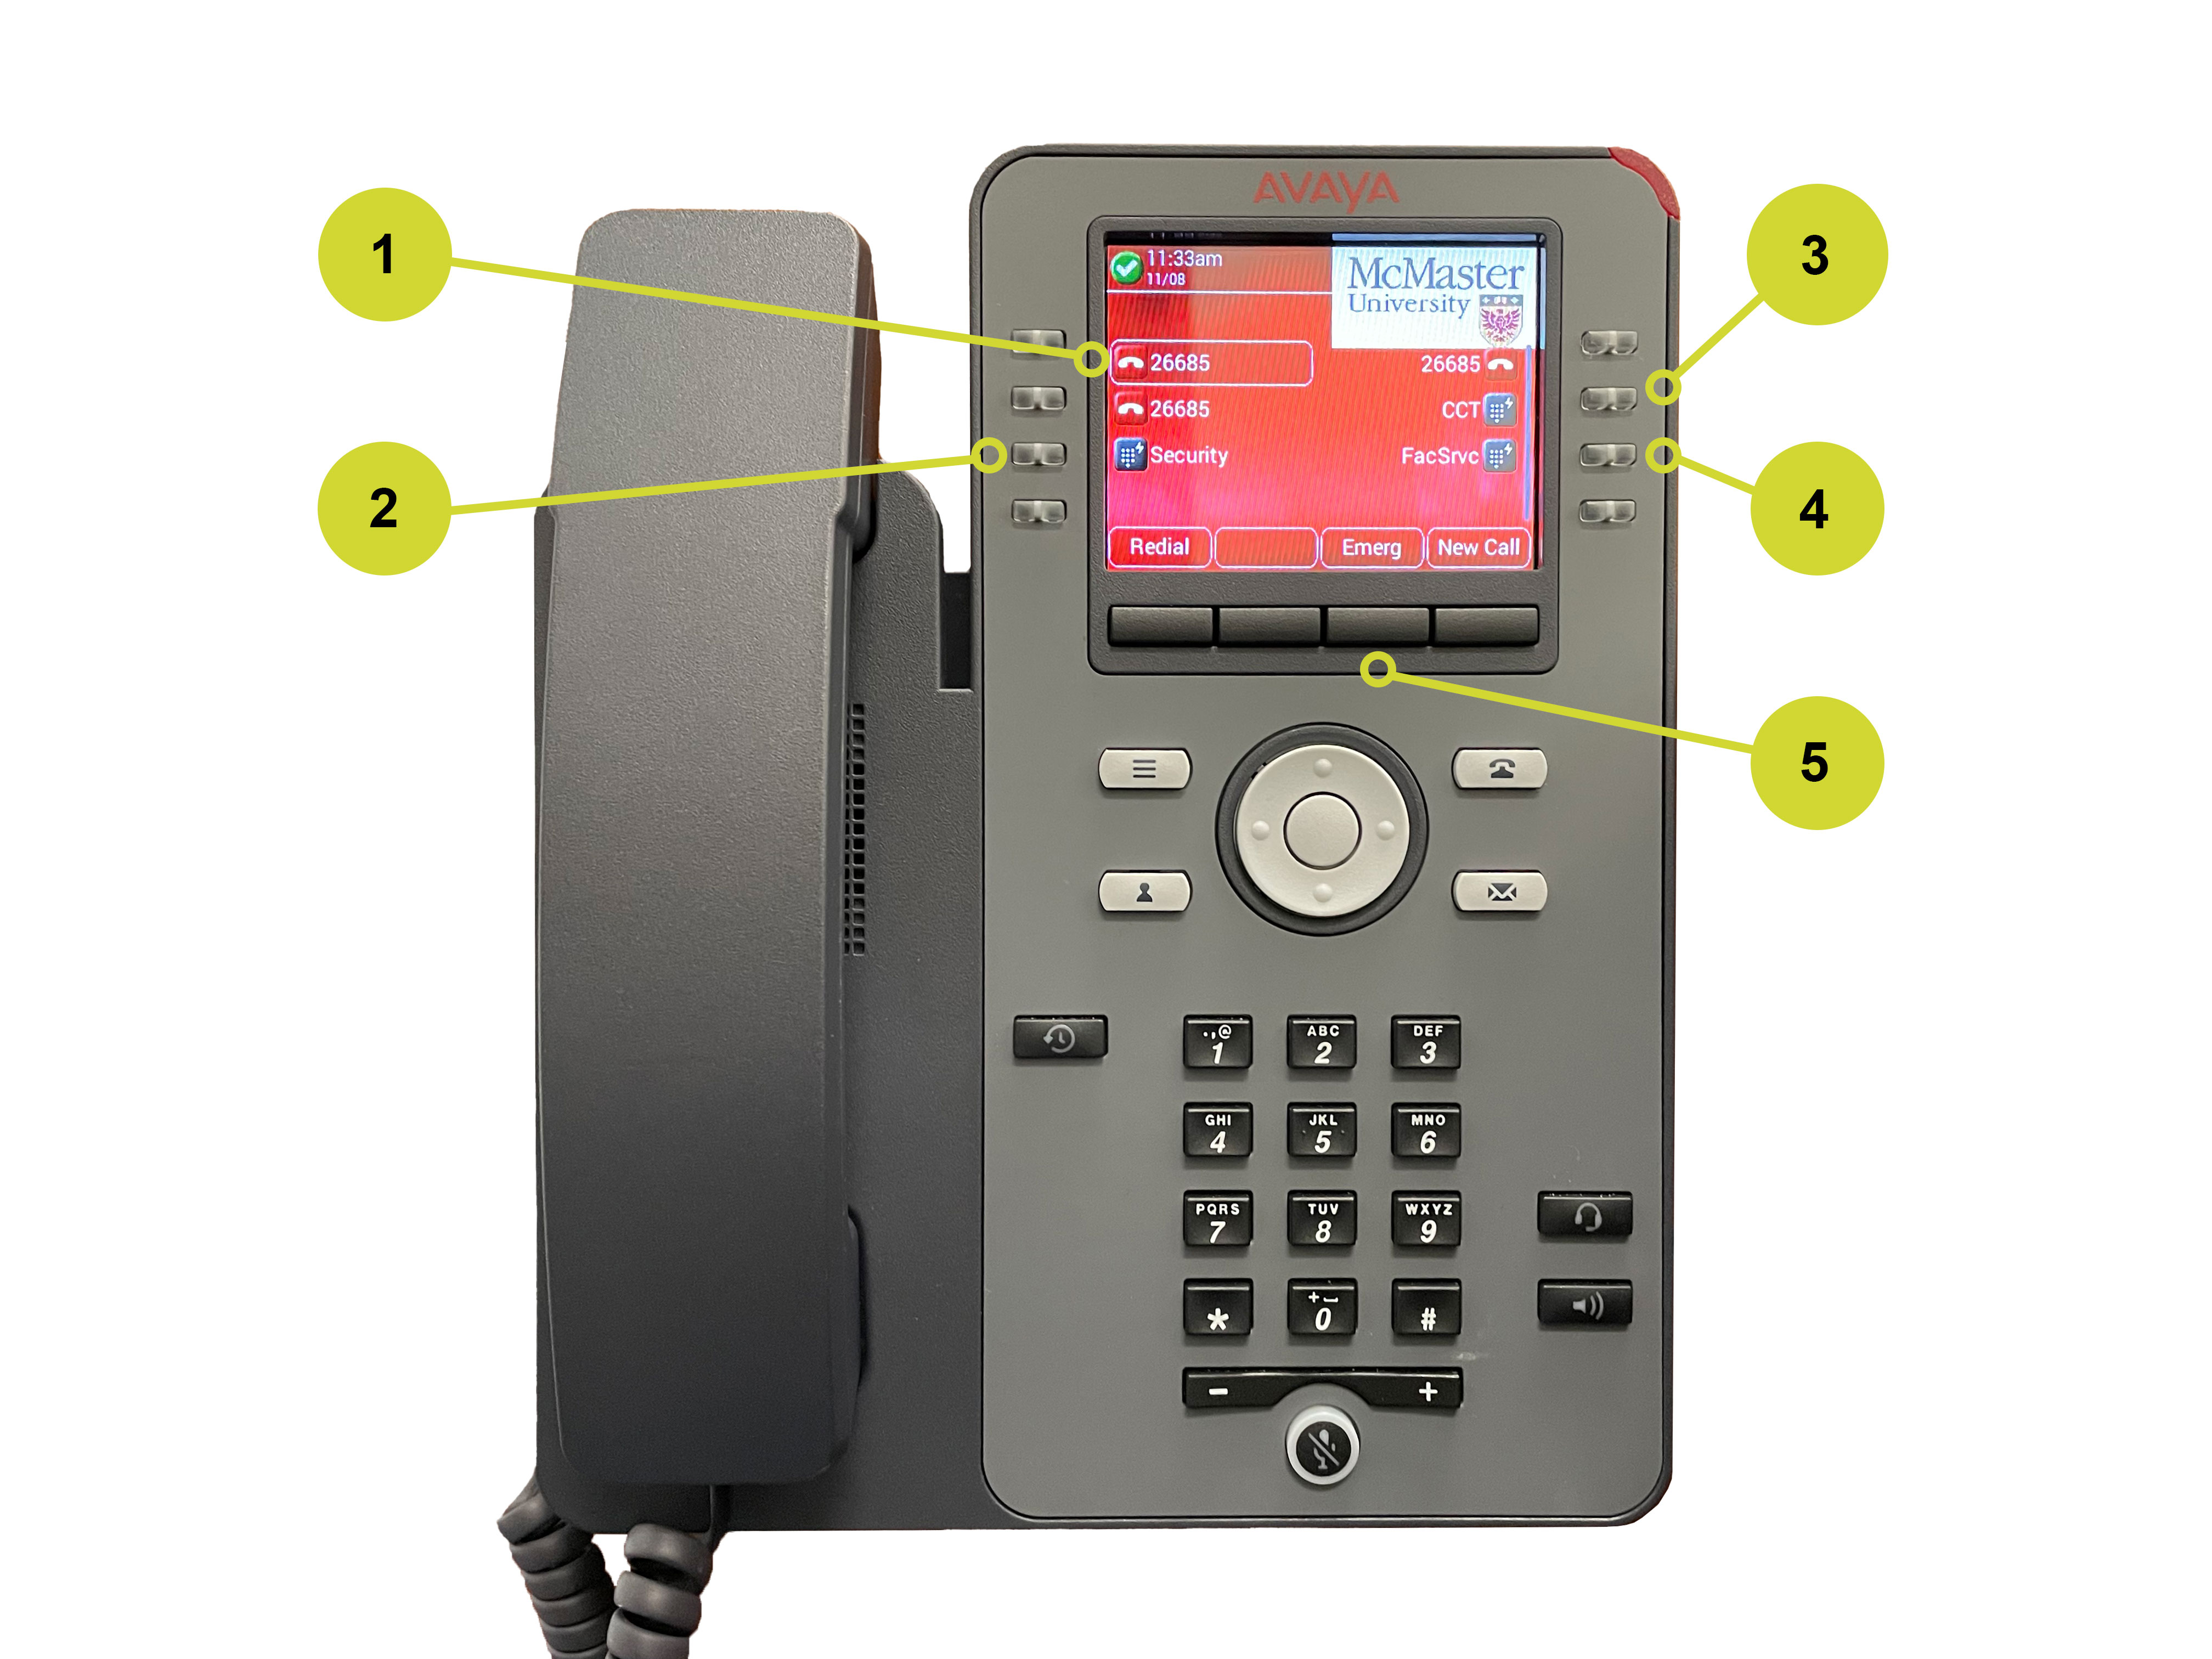 Interface diagram of Avaya telephones installed in classrooms. Numbers map out locations on the telephone interface.  1. Points to an area of the phone's digital screen showing the extension number.  2. Points to a button on the left side of the phone that reads "Security." 3. Points to a button on the right side of the phone that reads "CCT." 4. Points to a button on the right of the phone that reads "FacSrvc." 5. Points to a button below the digital screen that reads "Emerg." 